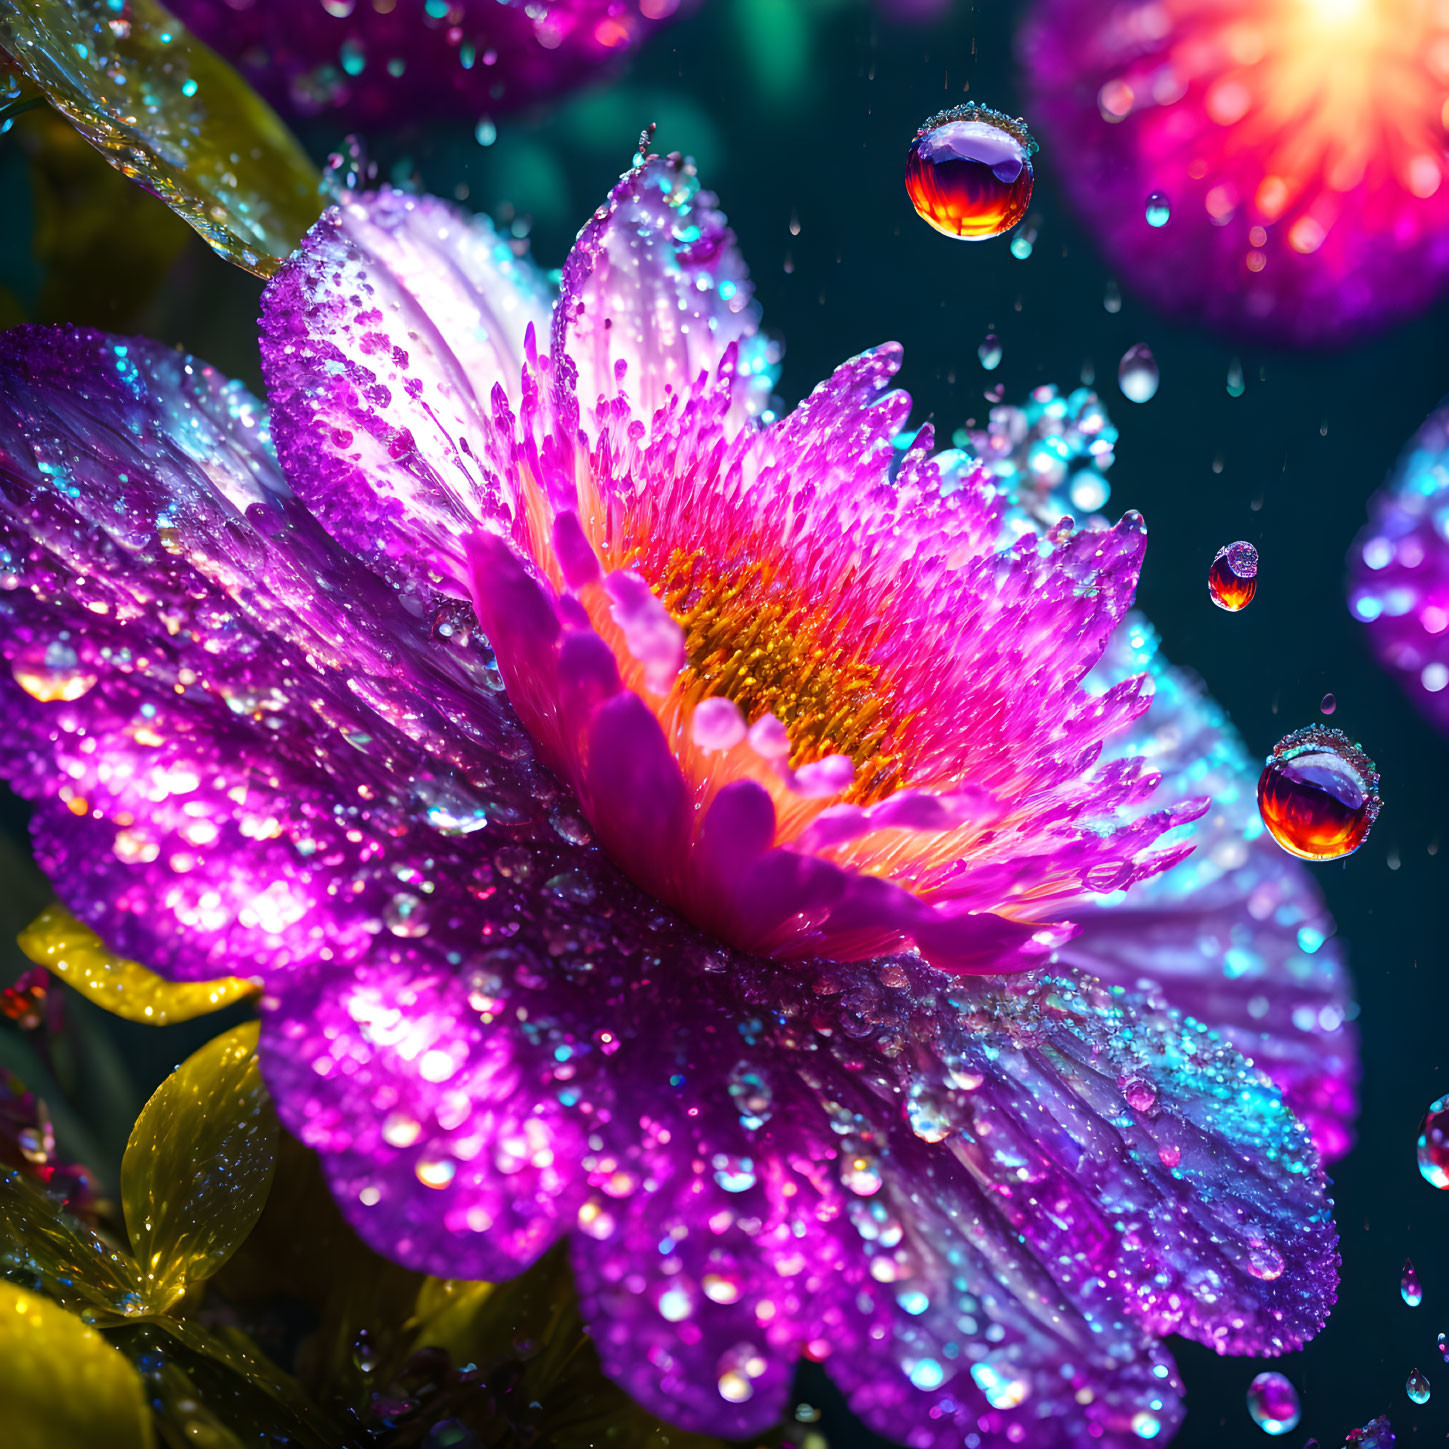 Vibrant purple flower with pink center in water droplets, set against lush greenery.